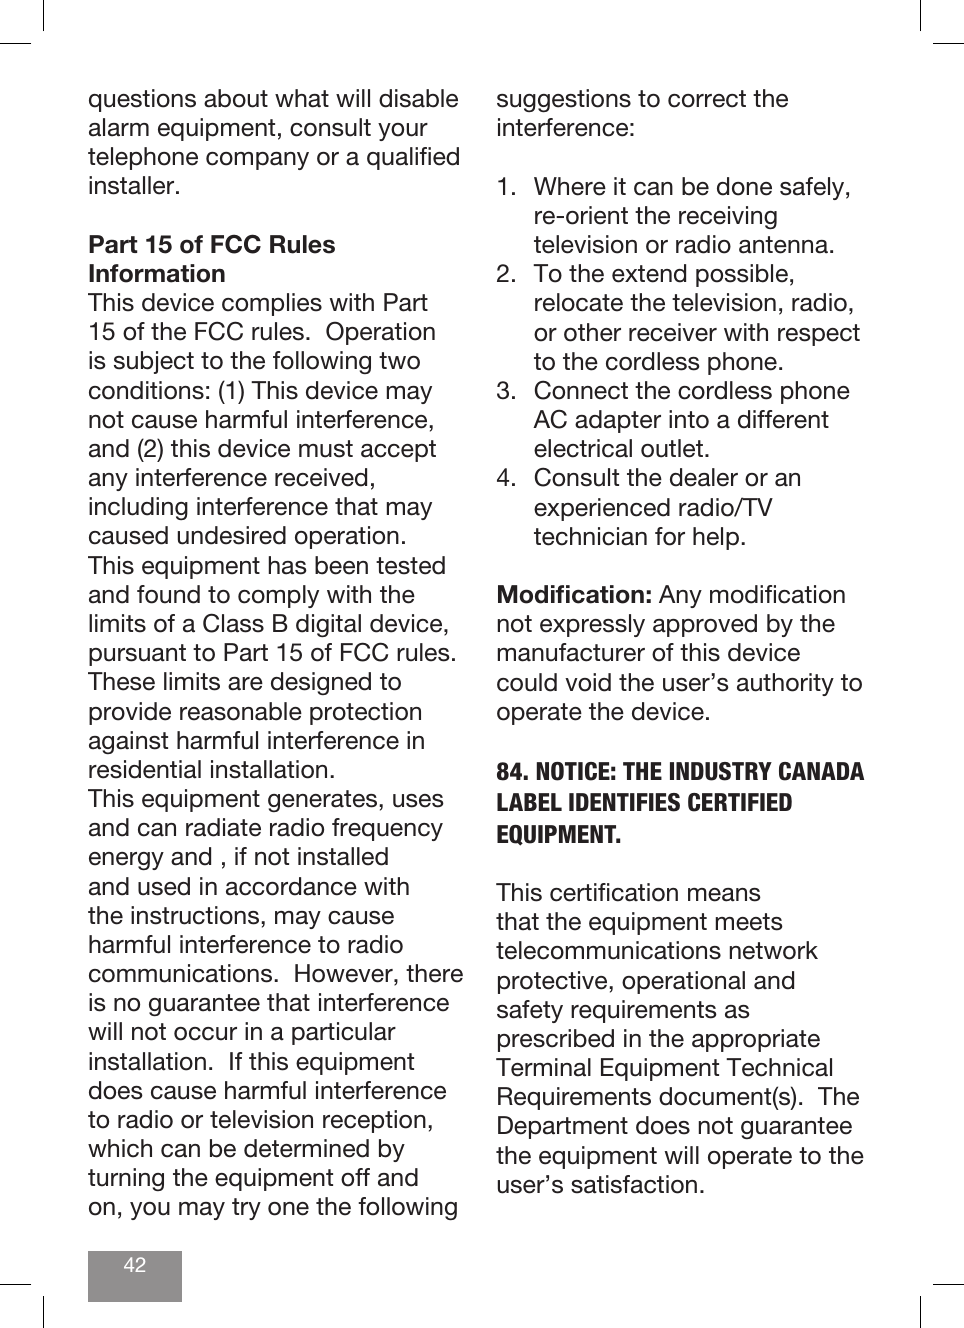 42questions about what will disable alarm equipment, consult your telephone company or a qualied installer.Part 15 of FCC Rules InformationThis device complies with Part 15 of the FCC rules.  Operation is subject to the following two conditions: (1) This device may not cause harmful interference, and (2) this device must accept any interference received, including interference that may caused undesired operation.This equipment has been tested and found to comply with the limits of a Class B digital device, pursuant to Part 15 of FCC rules.  These limits are designed to provide reasonable protection against harmful interference in residential installation.This equipment generates, uses and can radiate radio frequency energy and , if not installed and used in accordance with the instructions, may cause harmful interference to radio communications.  However, there is no guarantee that interference will not occur in a particular installation.  If this equipment does cause harmful interference to radio or television reception, which can be determined by turning the equipment off and on, you may try one the following suggestions to correct the interference:1.  Where it can be done safely, re-orient the receiving television or radio antenna.2.  To the extend possible, relocate the television, radio, or other receiver with respect to the cordless phone.3.  Connect the cordless phone AC adapter into a different electrical outlet.4.  Consult the dealer or an experienced radio/TV technician for help.Modication: Any modication not expressly approved by the manufacturer of this device could void the user’s authority to operate the device.84. NOTICE: THE INDUSTRY CANADA LABEL IDENTIFIES CERTIFIED EQUIPMENT.  This certication means that the equipment meets telecommunications network protective, operational and safety requirements as prescribed in the appropriate Terminal Equipment Technical Requirements document(s).  The Department does not guarantee the equipment will operate to the user’s satisfaction.